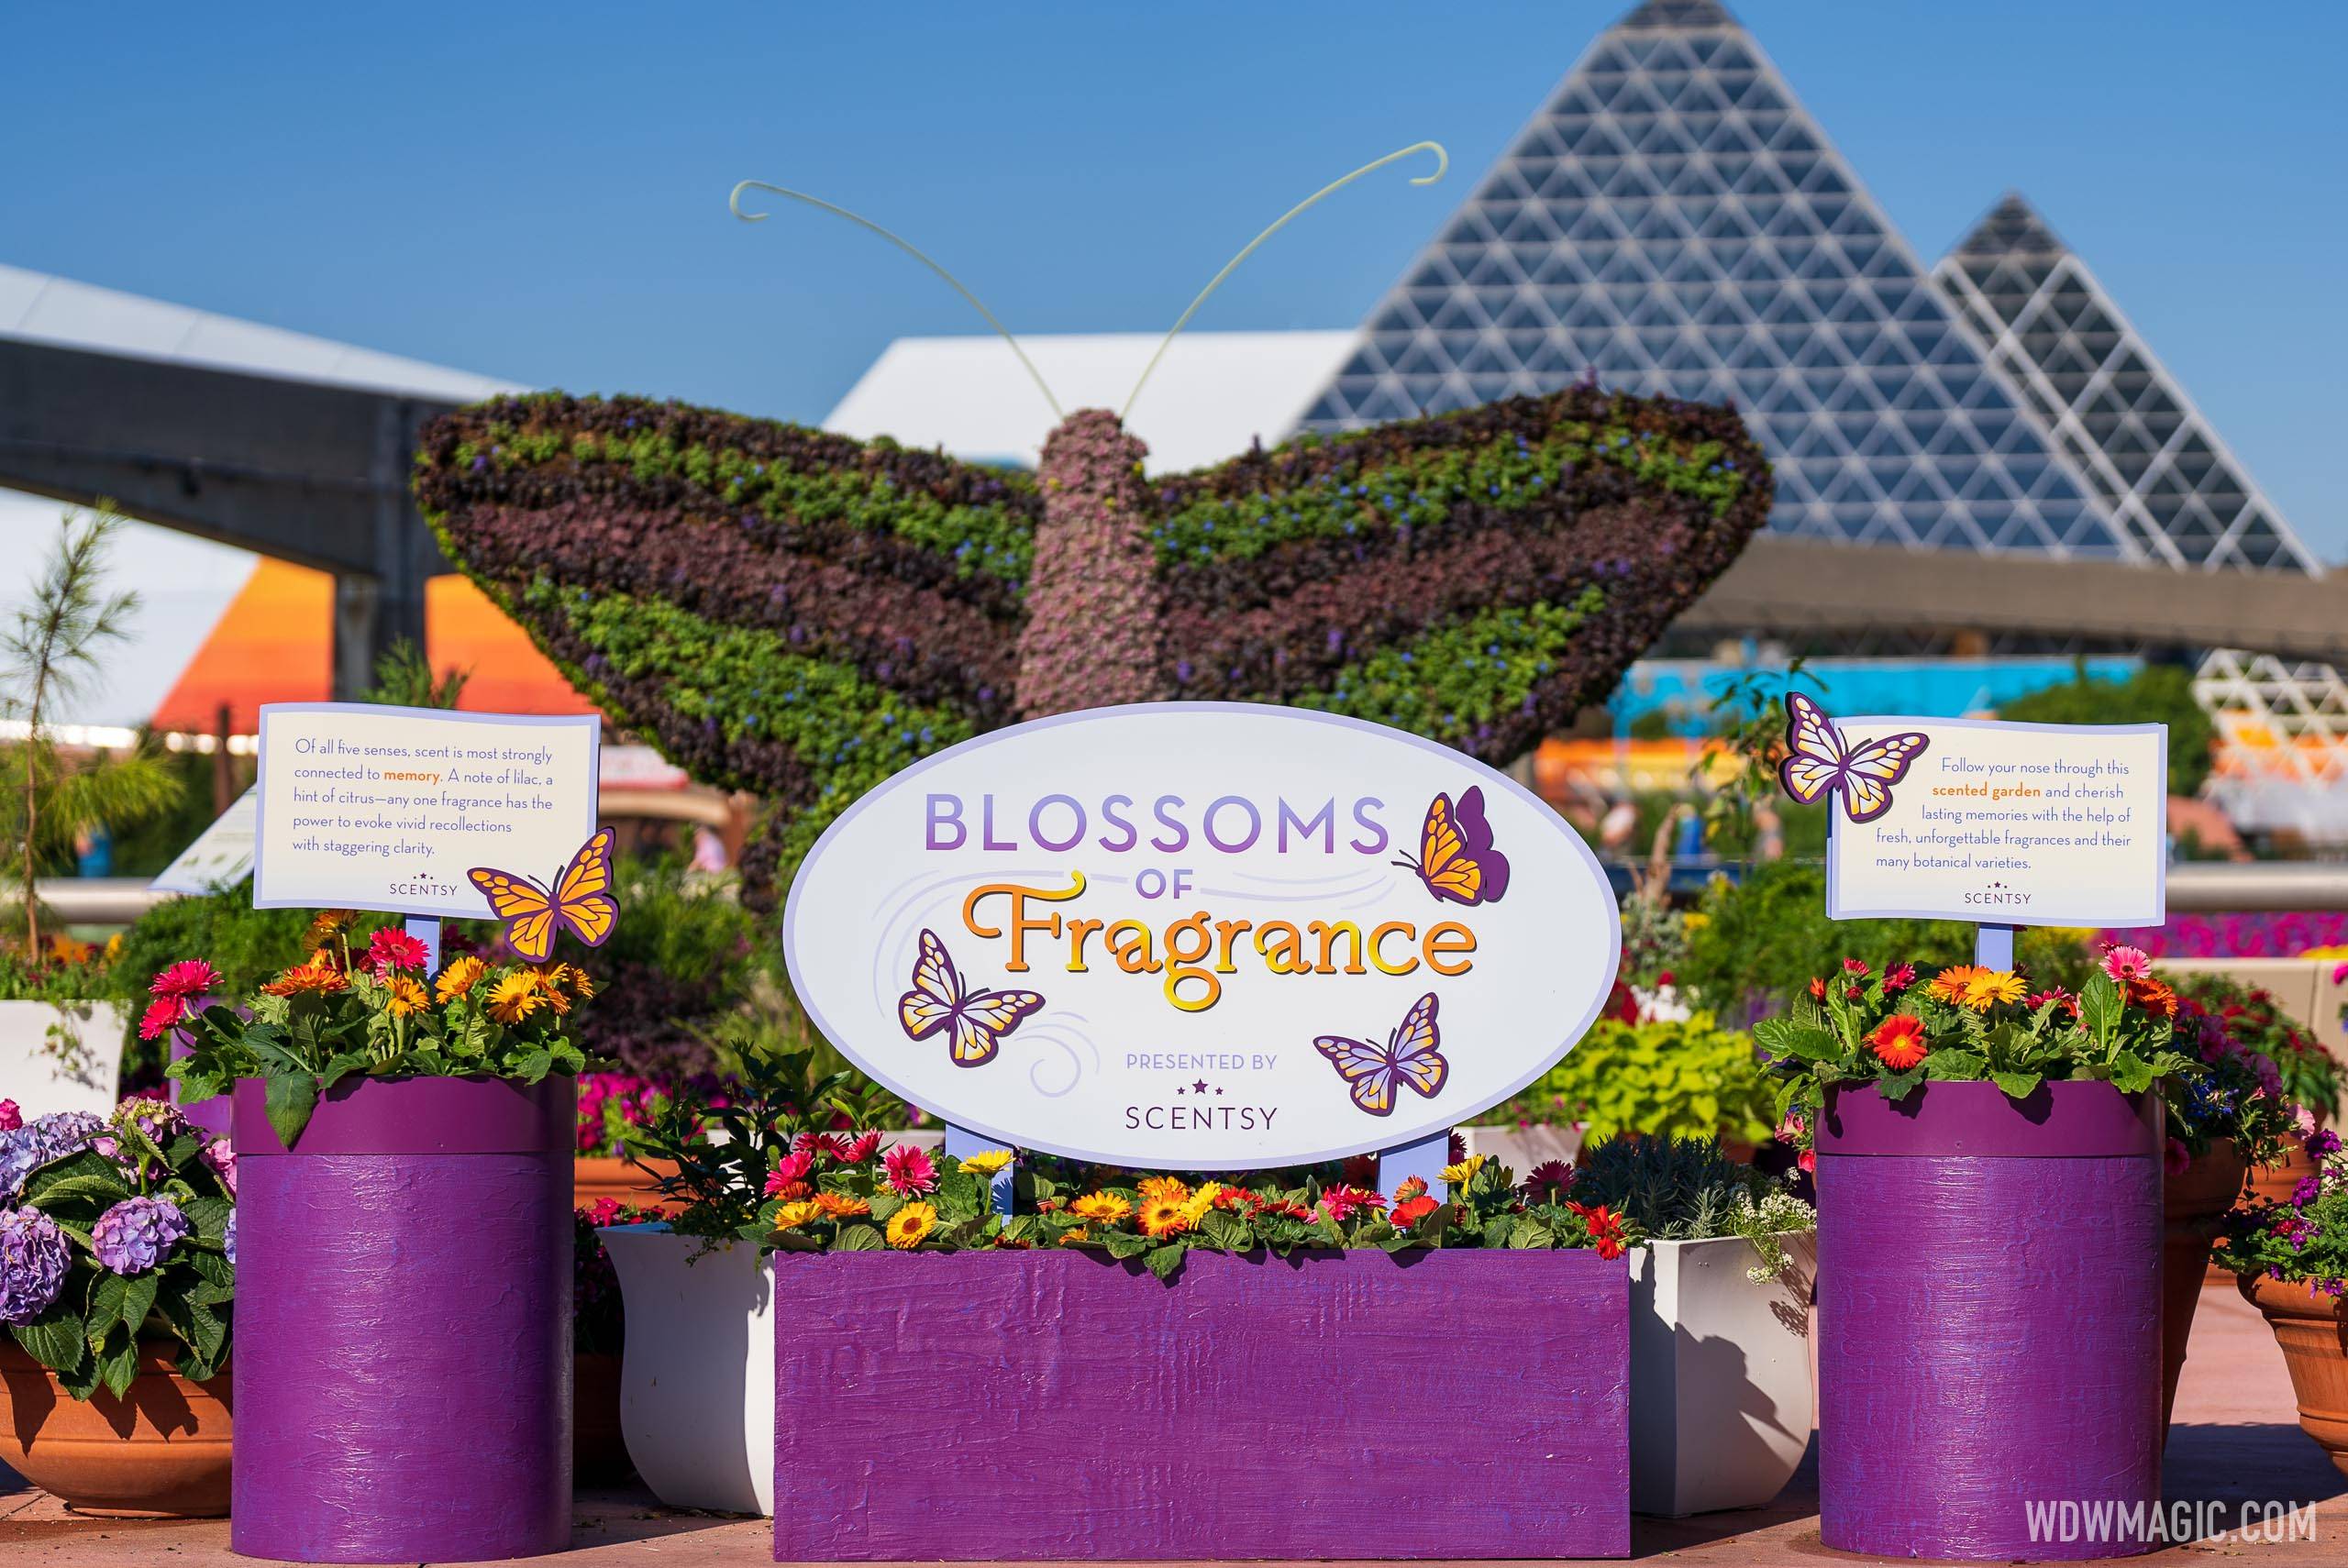 Blossoms of Fragrance presented by Scentsy